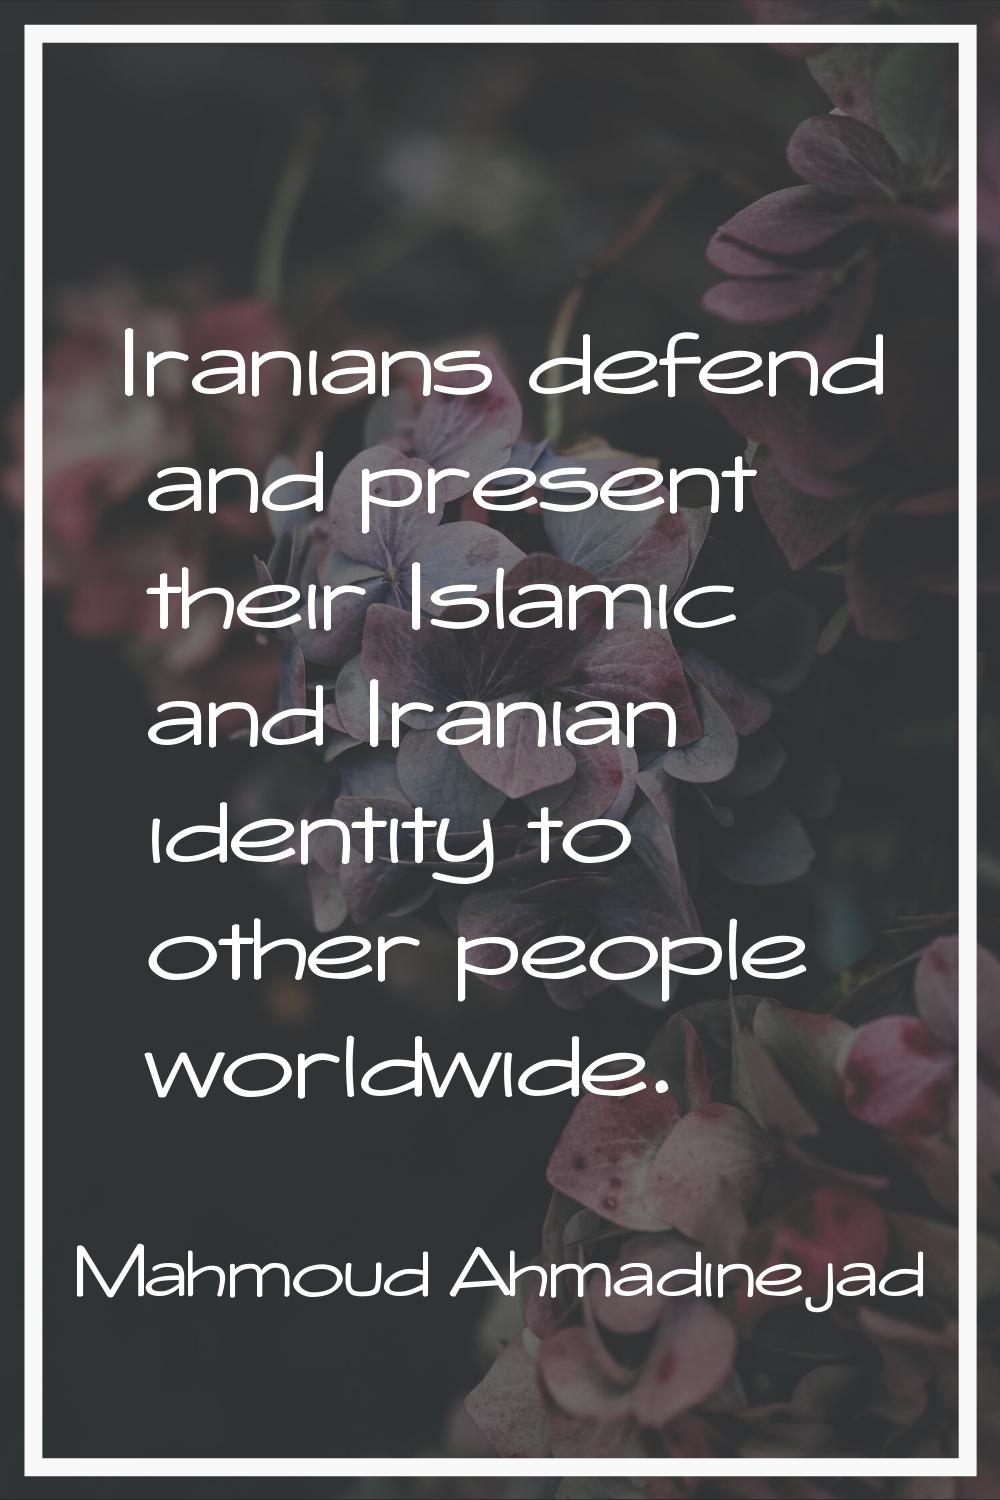 Iranians defend and present their Islamic and Iranian identity to other people worldwide.